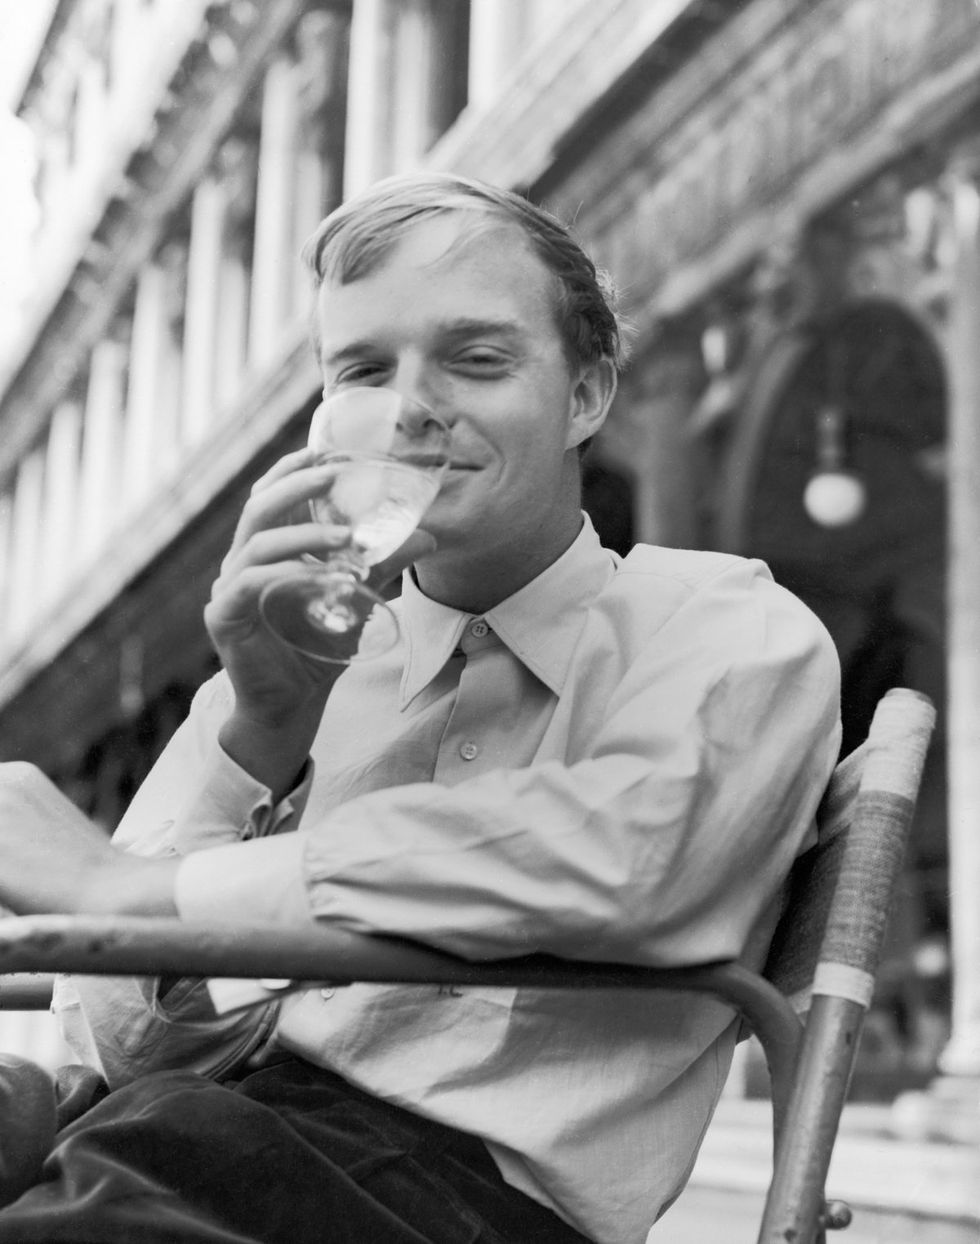 Vintage photo gallery Truman Capote out gay novelist and screenwriter through the years